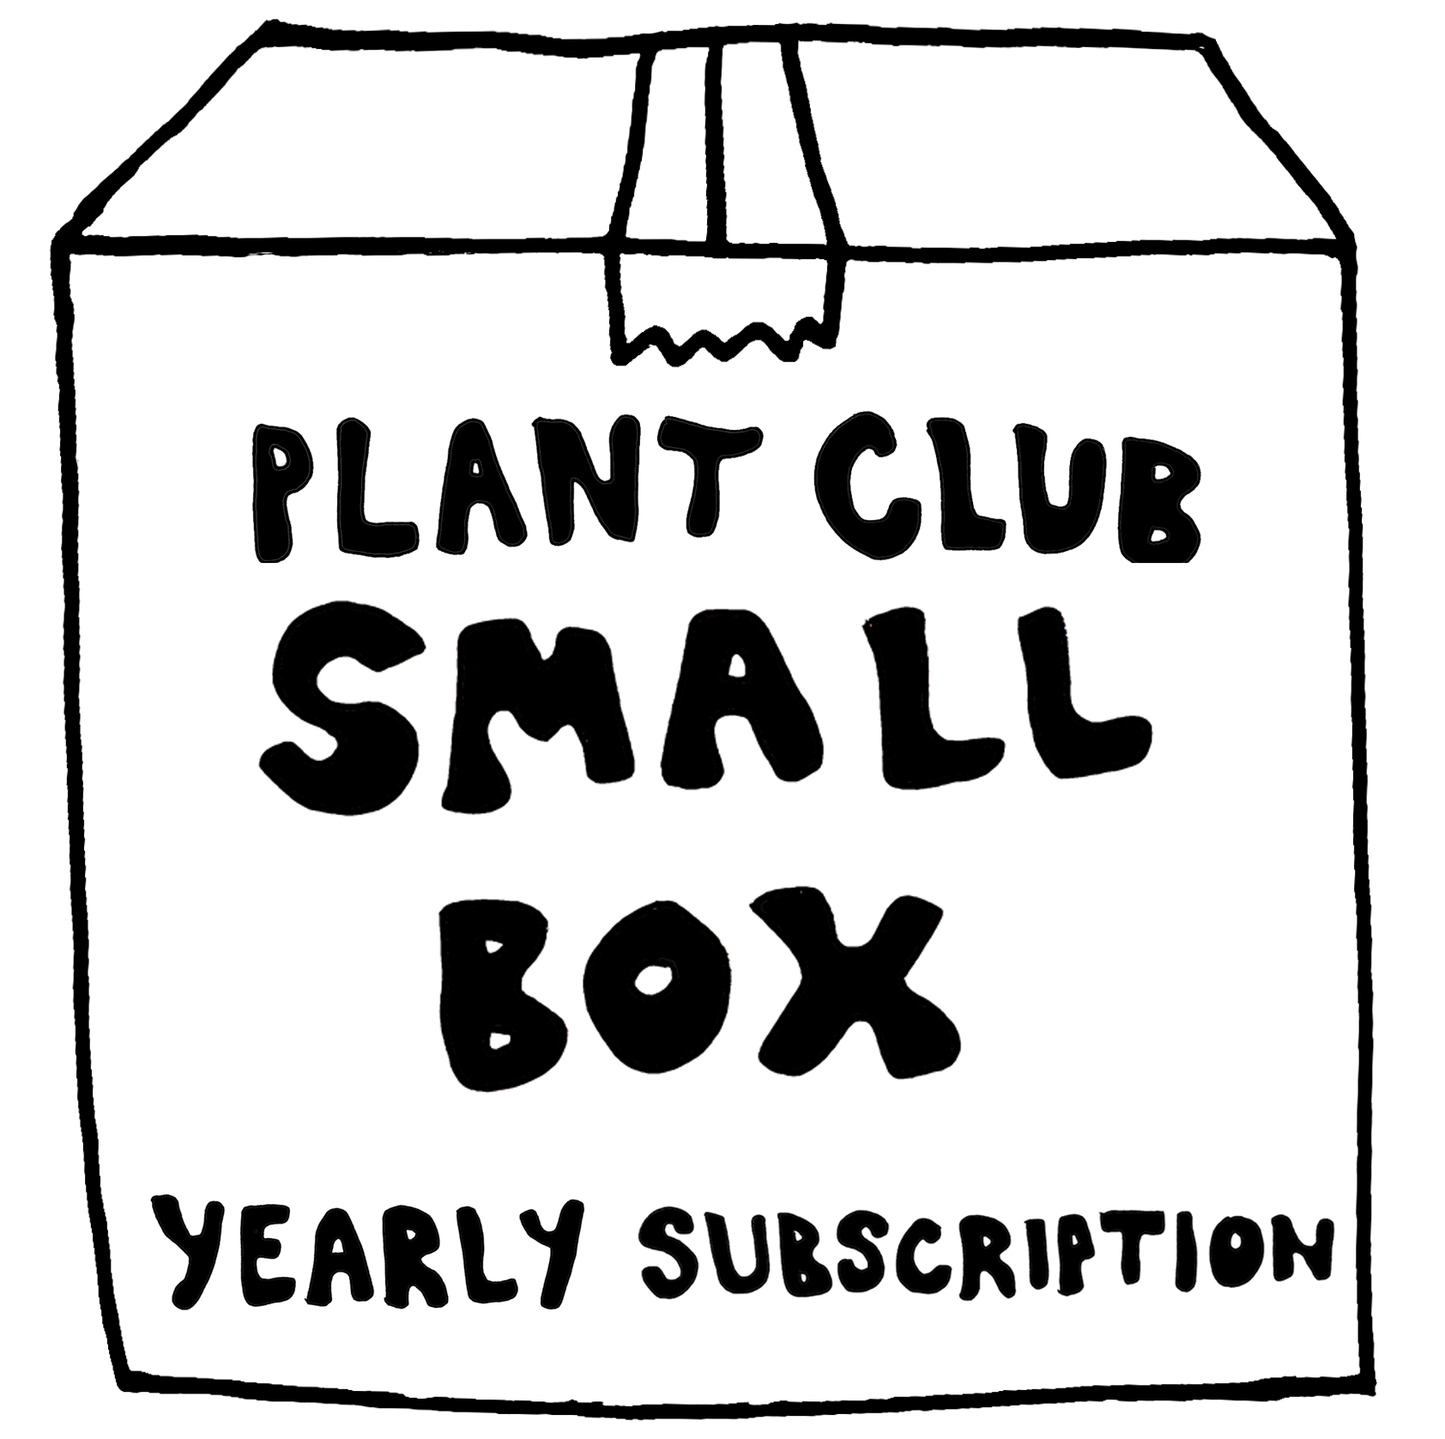 PLANT CLUB - SMALL BOX (YEARLY SUBSCRIPTION)